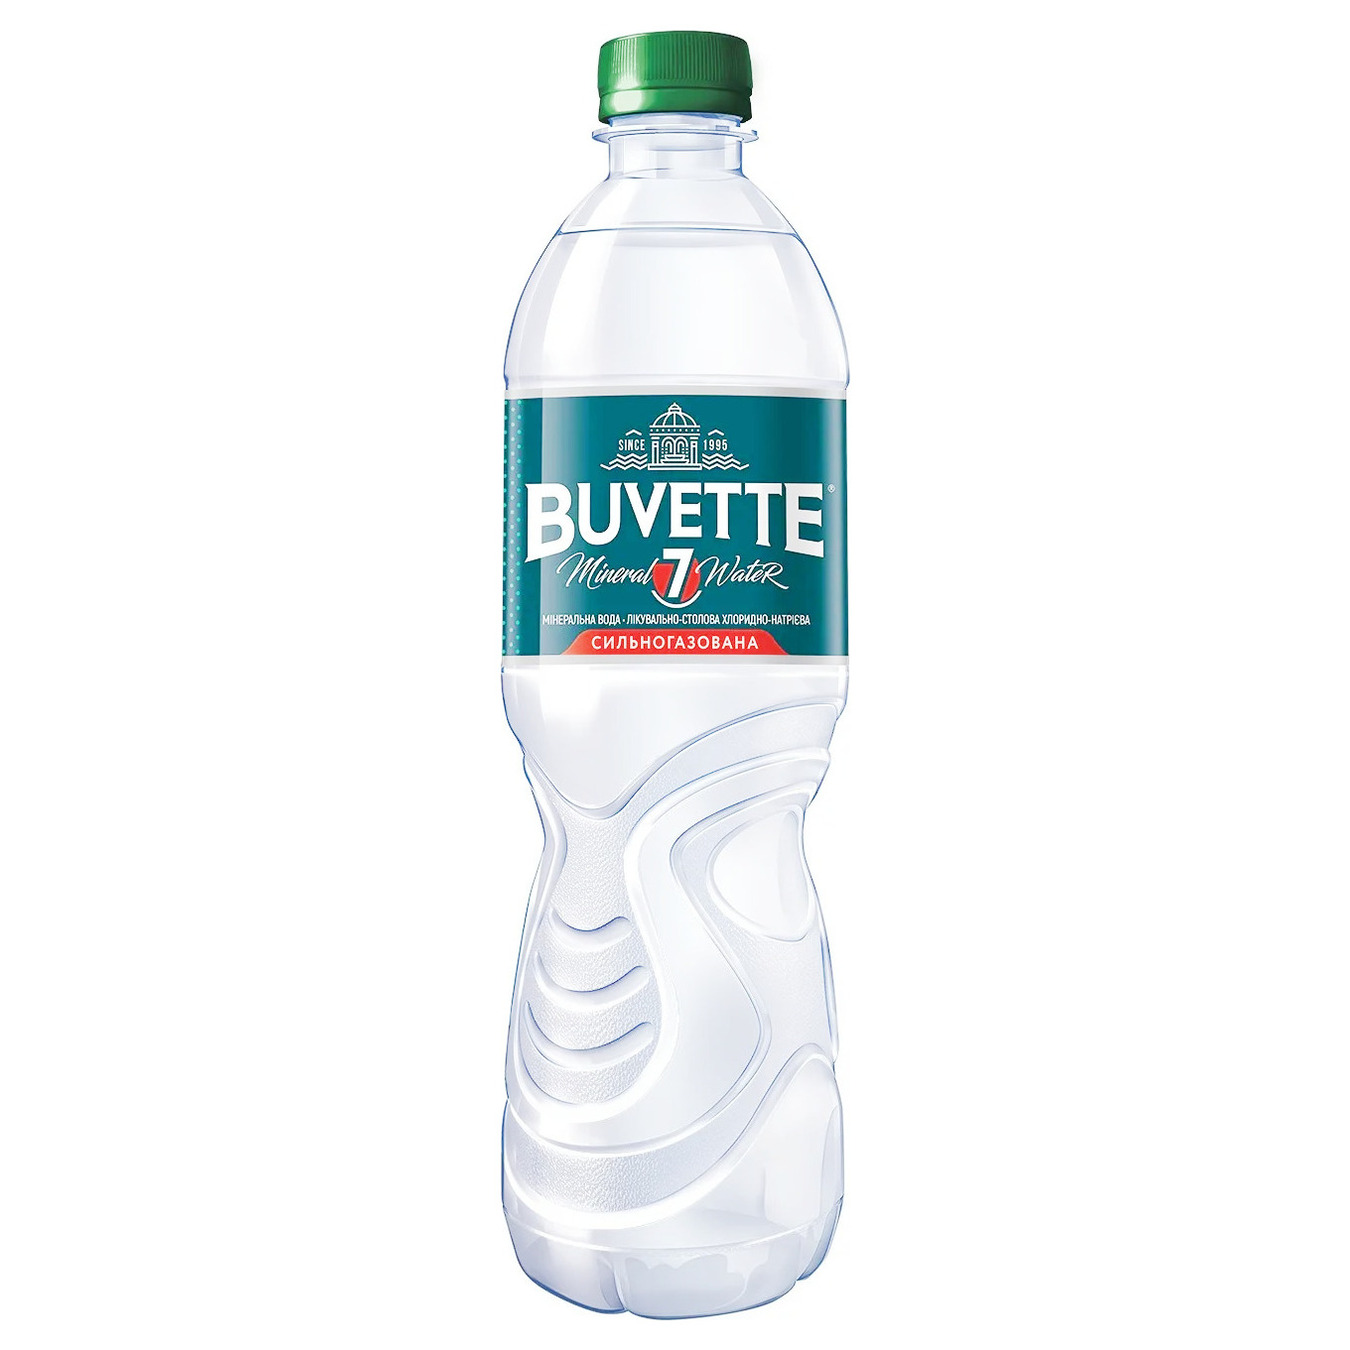 Buvette No.7 Highly Carbonated Mineral Water 500ml